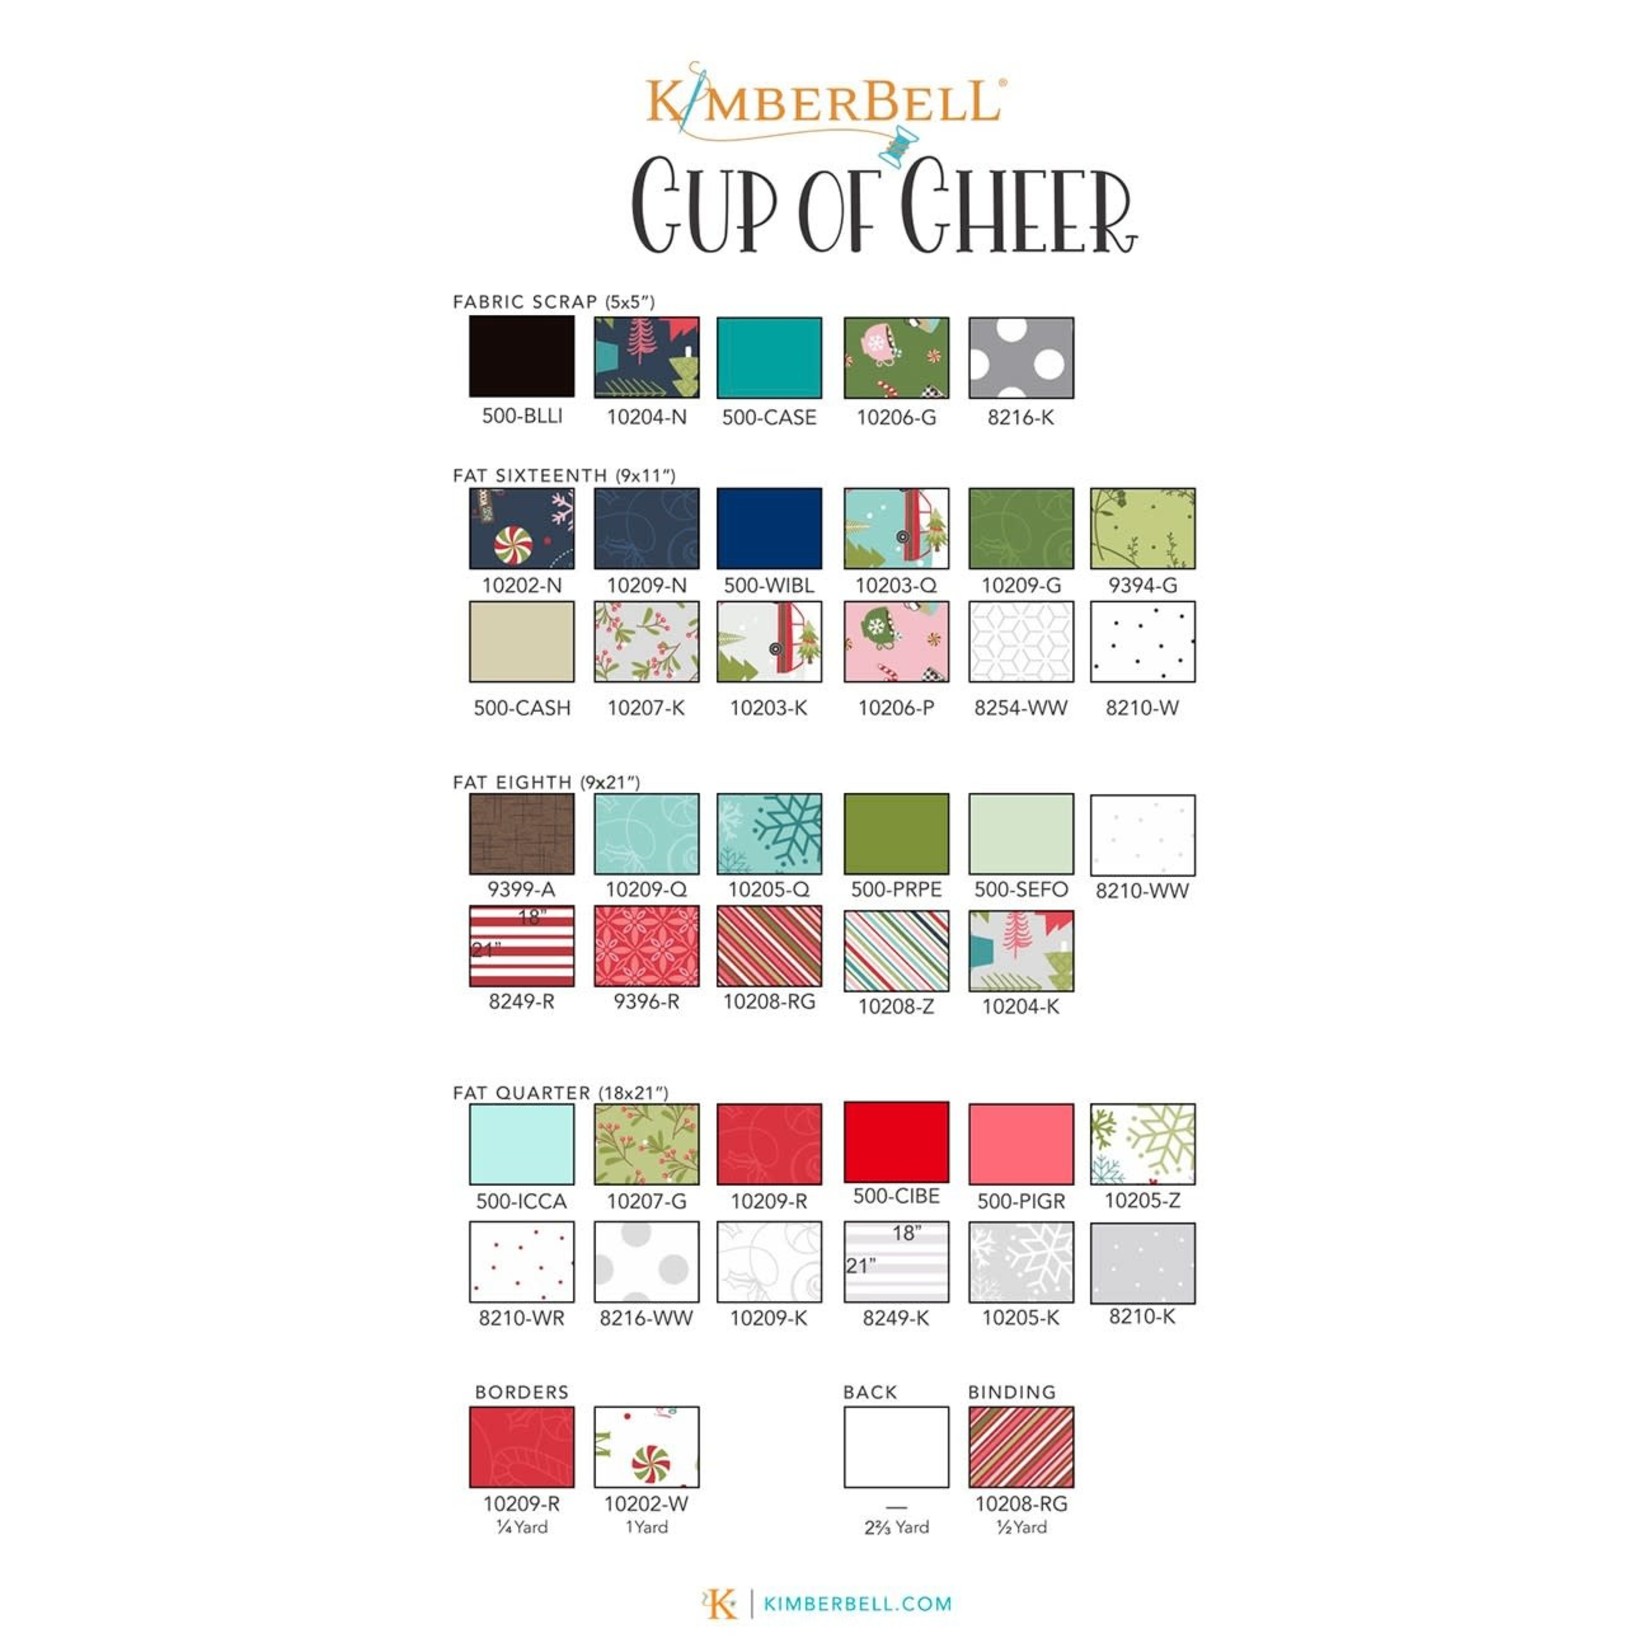 Kimberbell Designs Cup of Cheer Advent Quilt